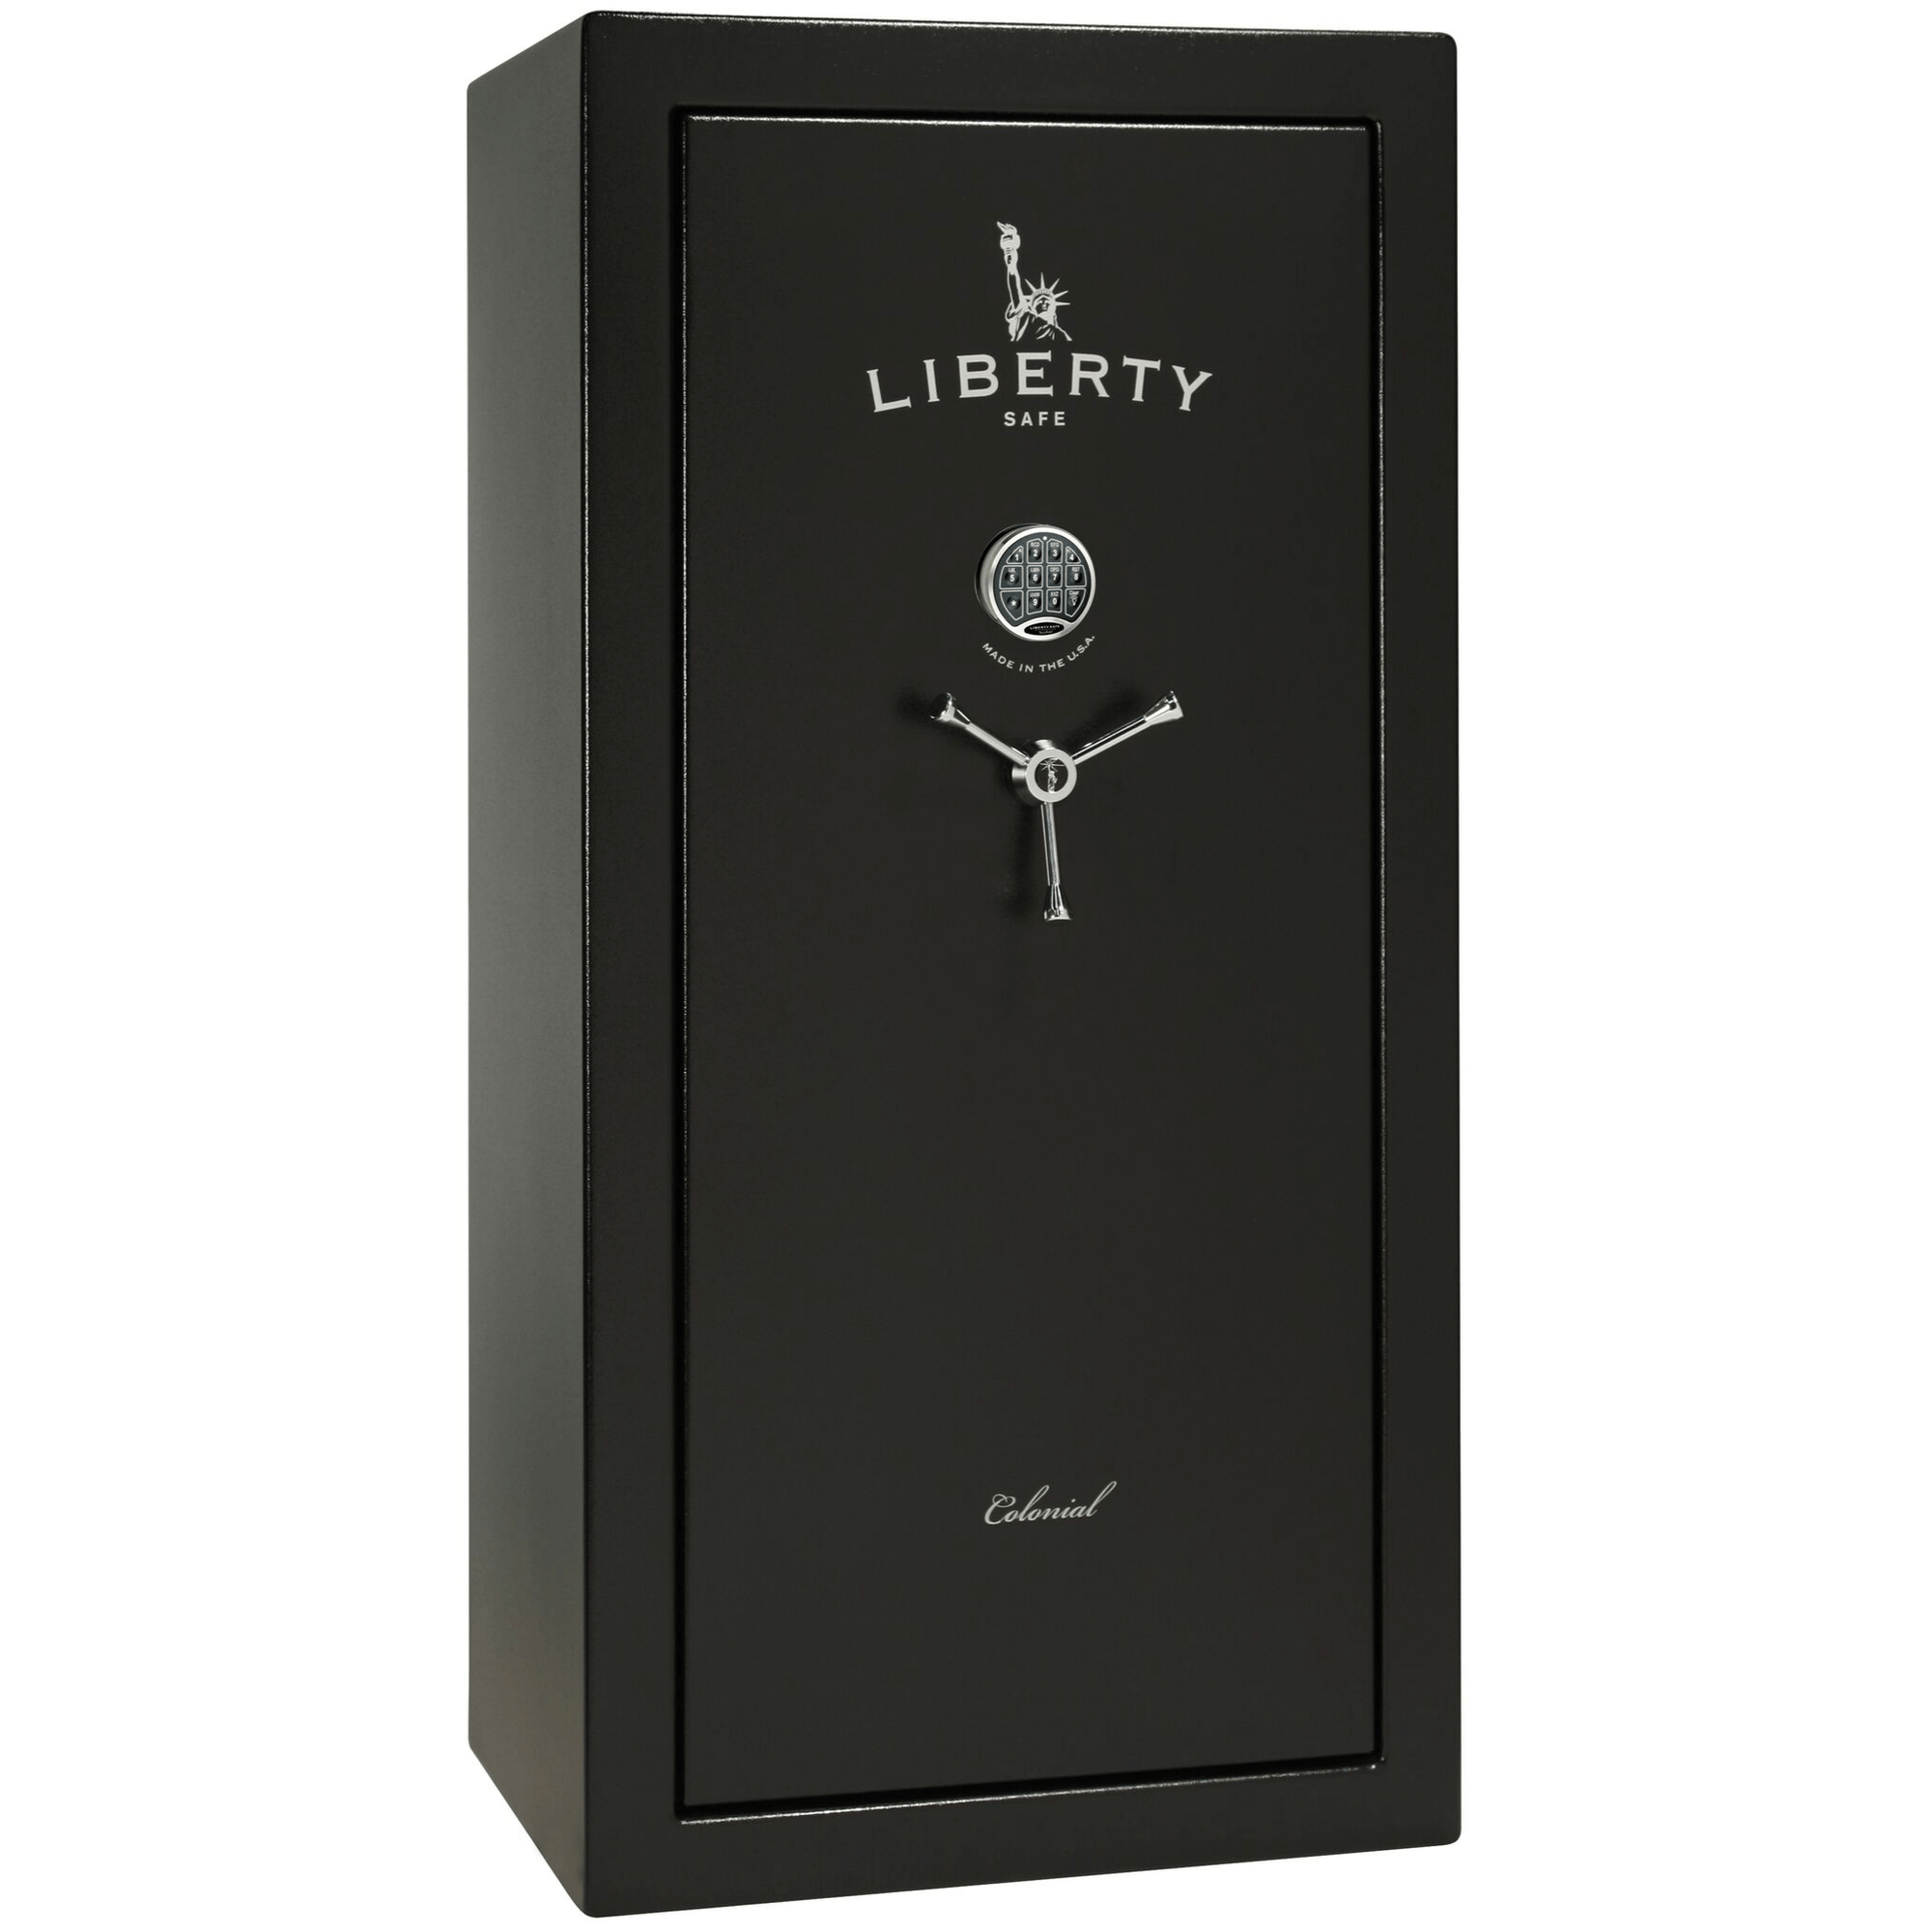 Colonial Series | Level 3 Security | 75 Minute Fire Protection | 23 | DIMENSIONS: 60.5"(H) X 30"(W) X 25"(D) | Black Textured | Electronic Lock